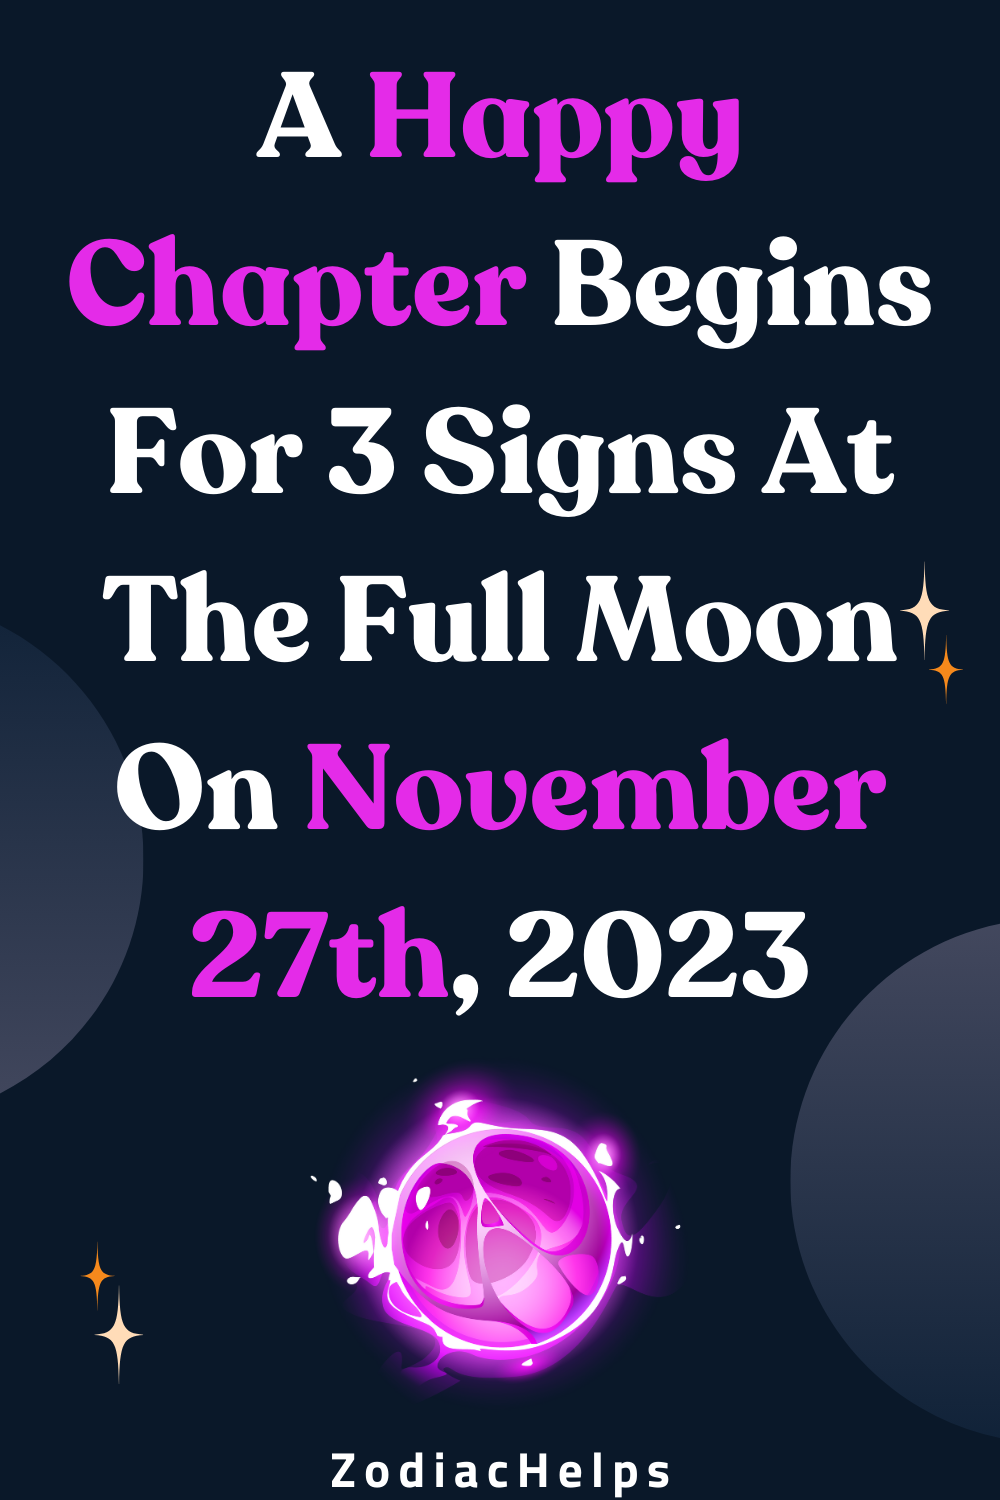 A Happy Chapter Begins For 3 Signs At The Full Moon On November 27th, 2023